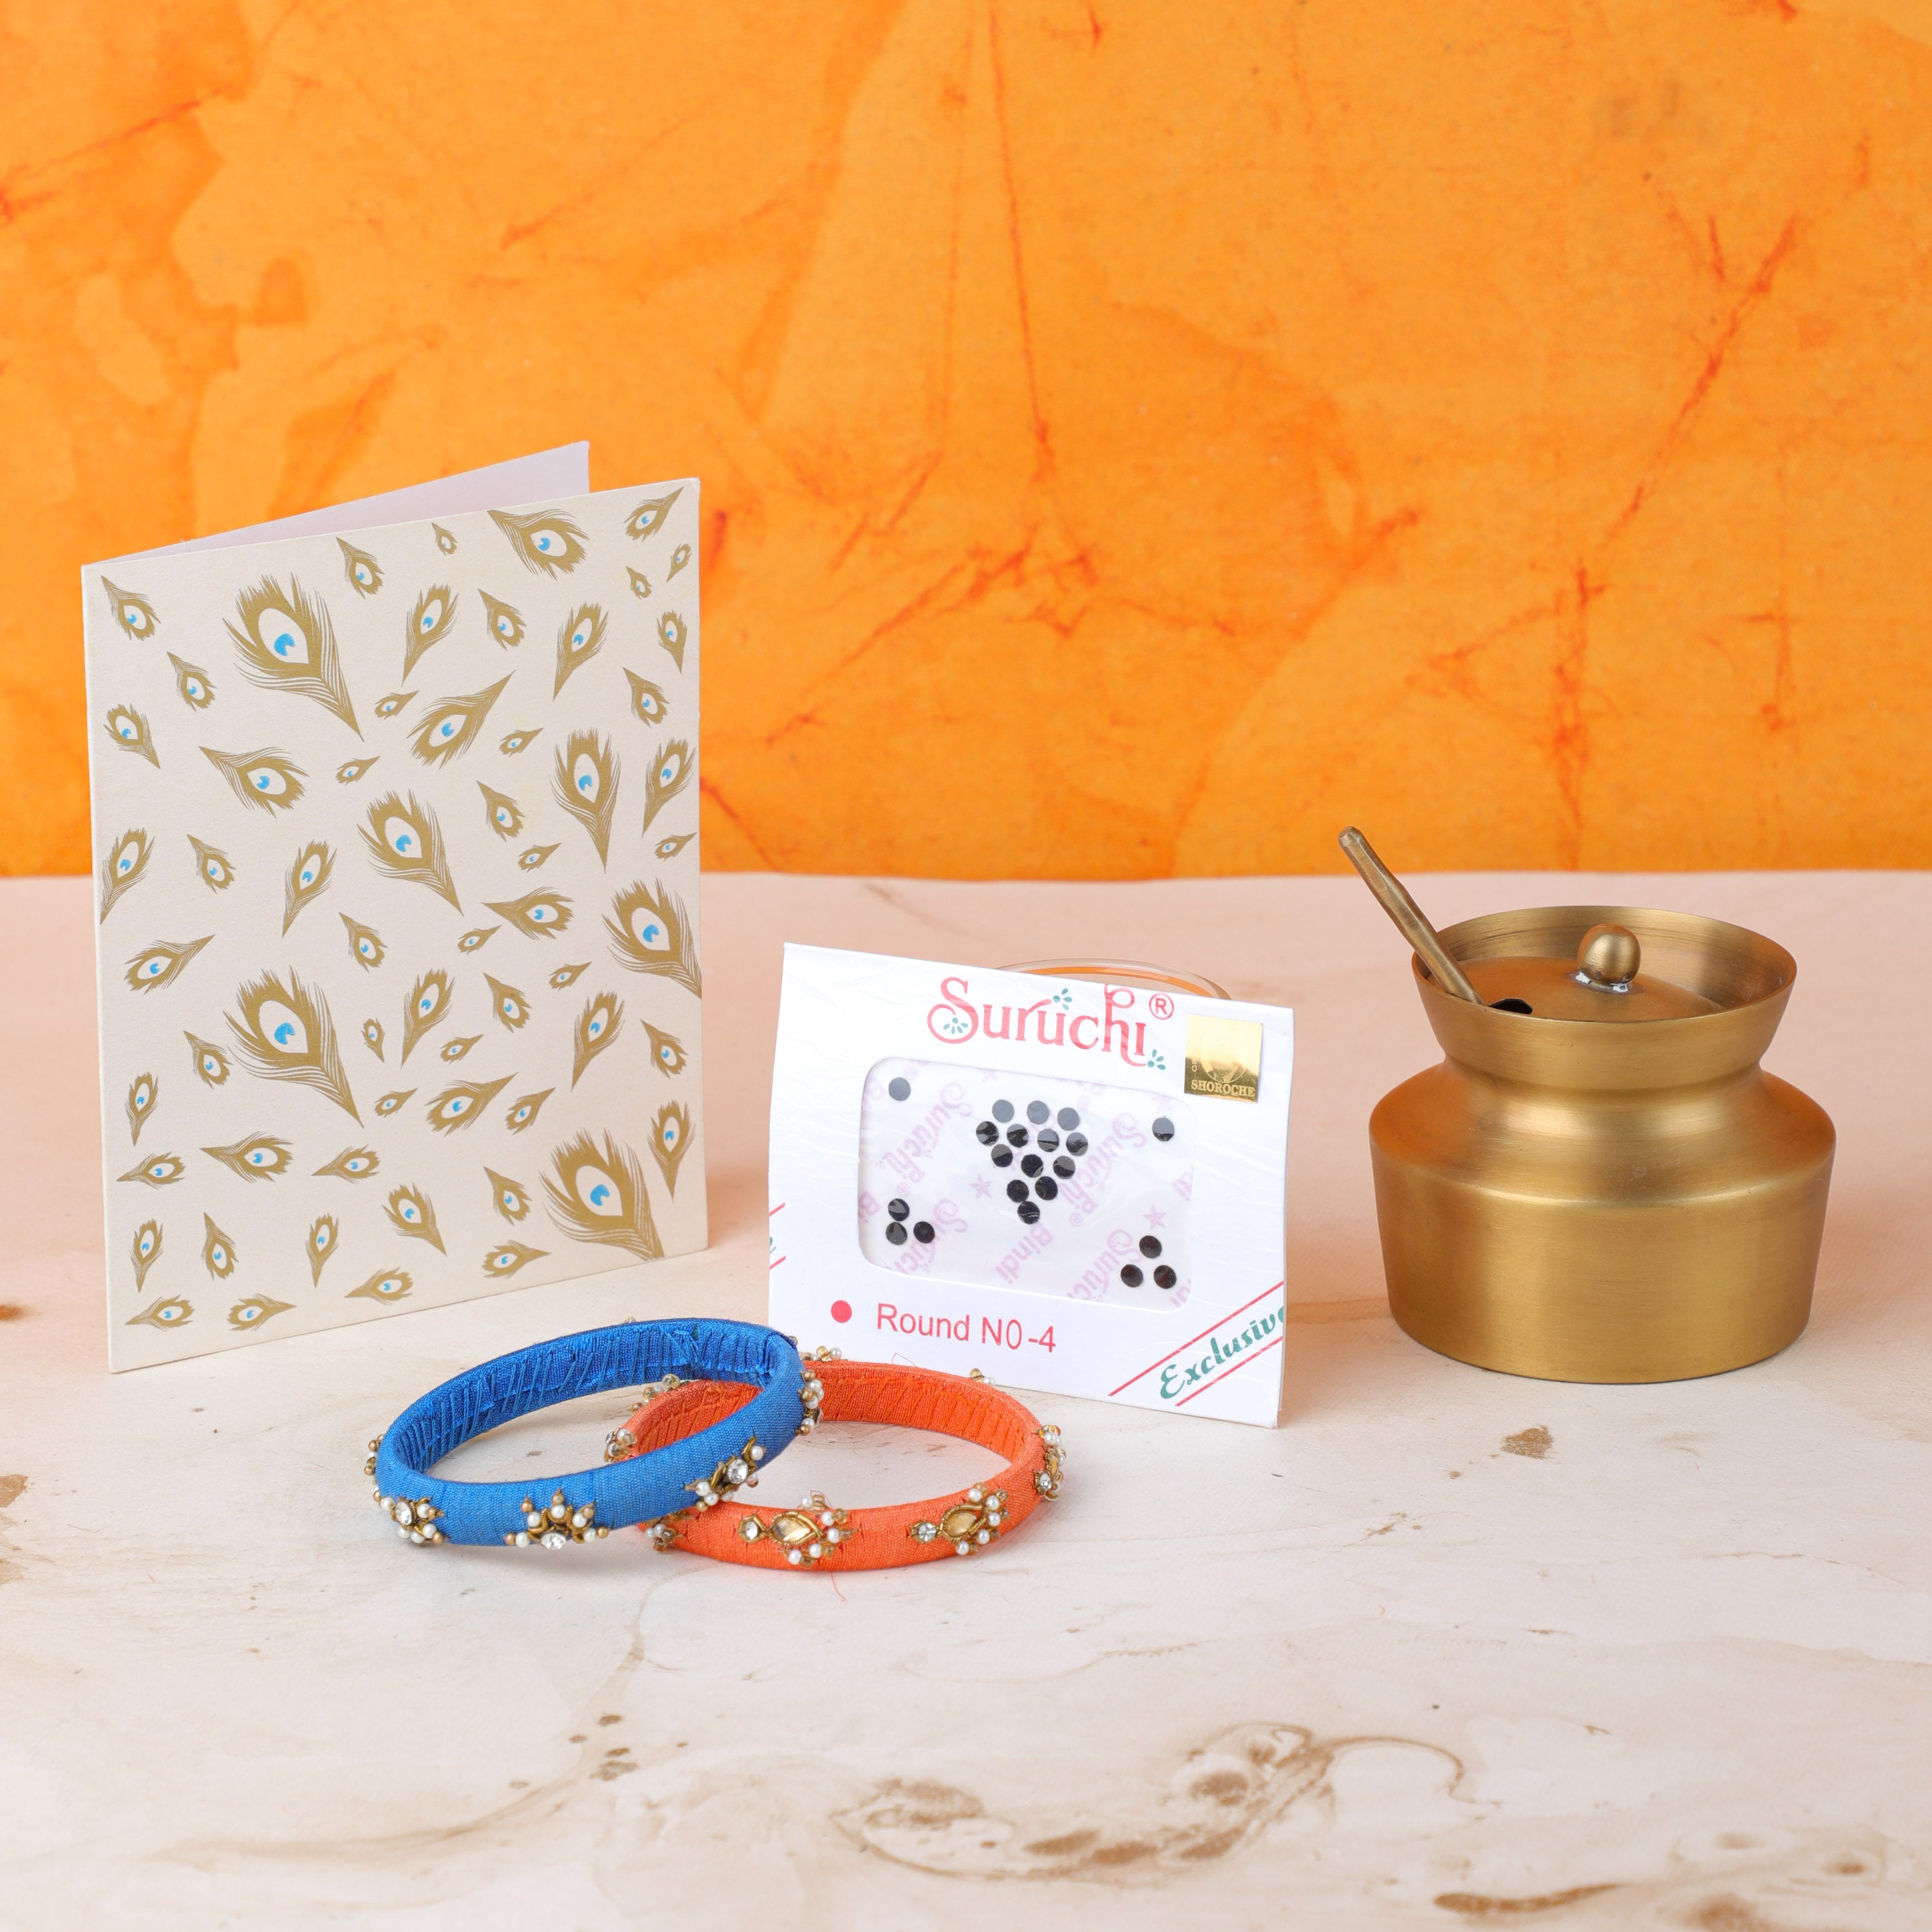 Latest Rakhi Designs for Your Brother - Happy Raksha Bandhan | Rakhi  design, Rakhi, Rakhi gifts